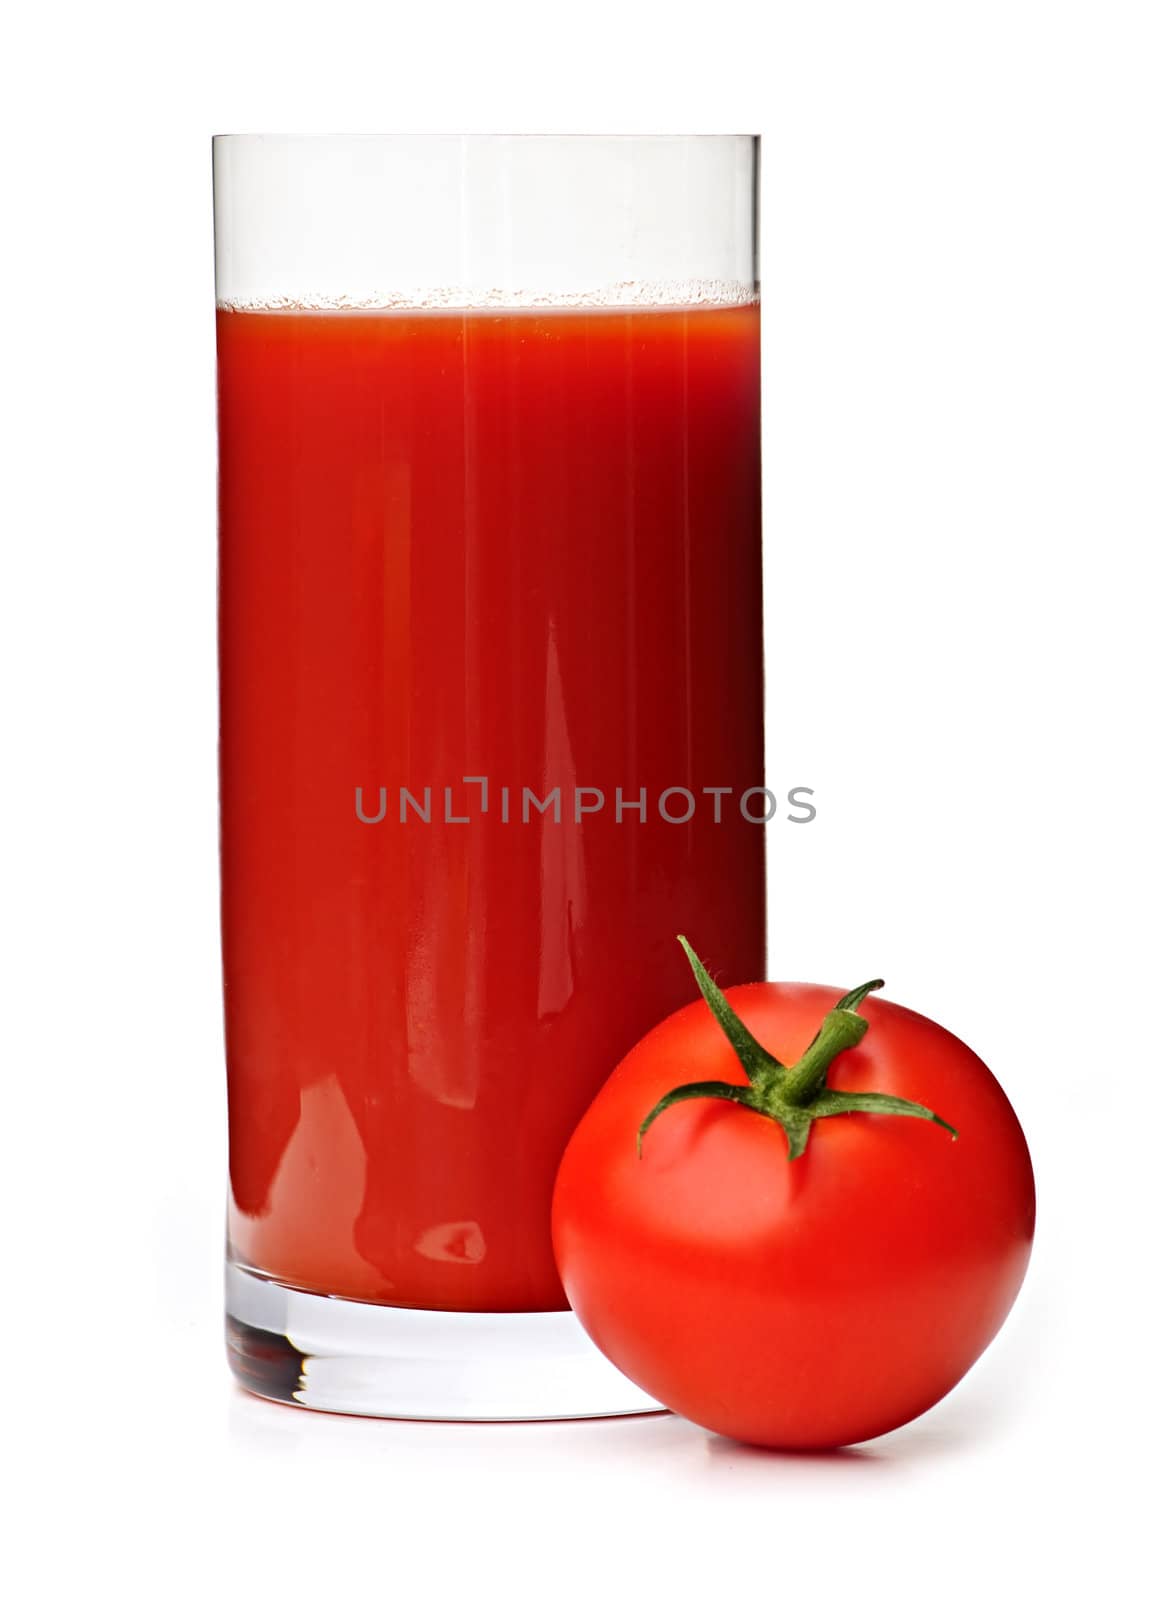 Tomato juice in clear glass isolated on white background